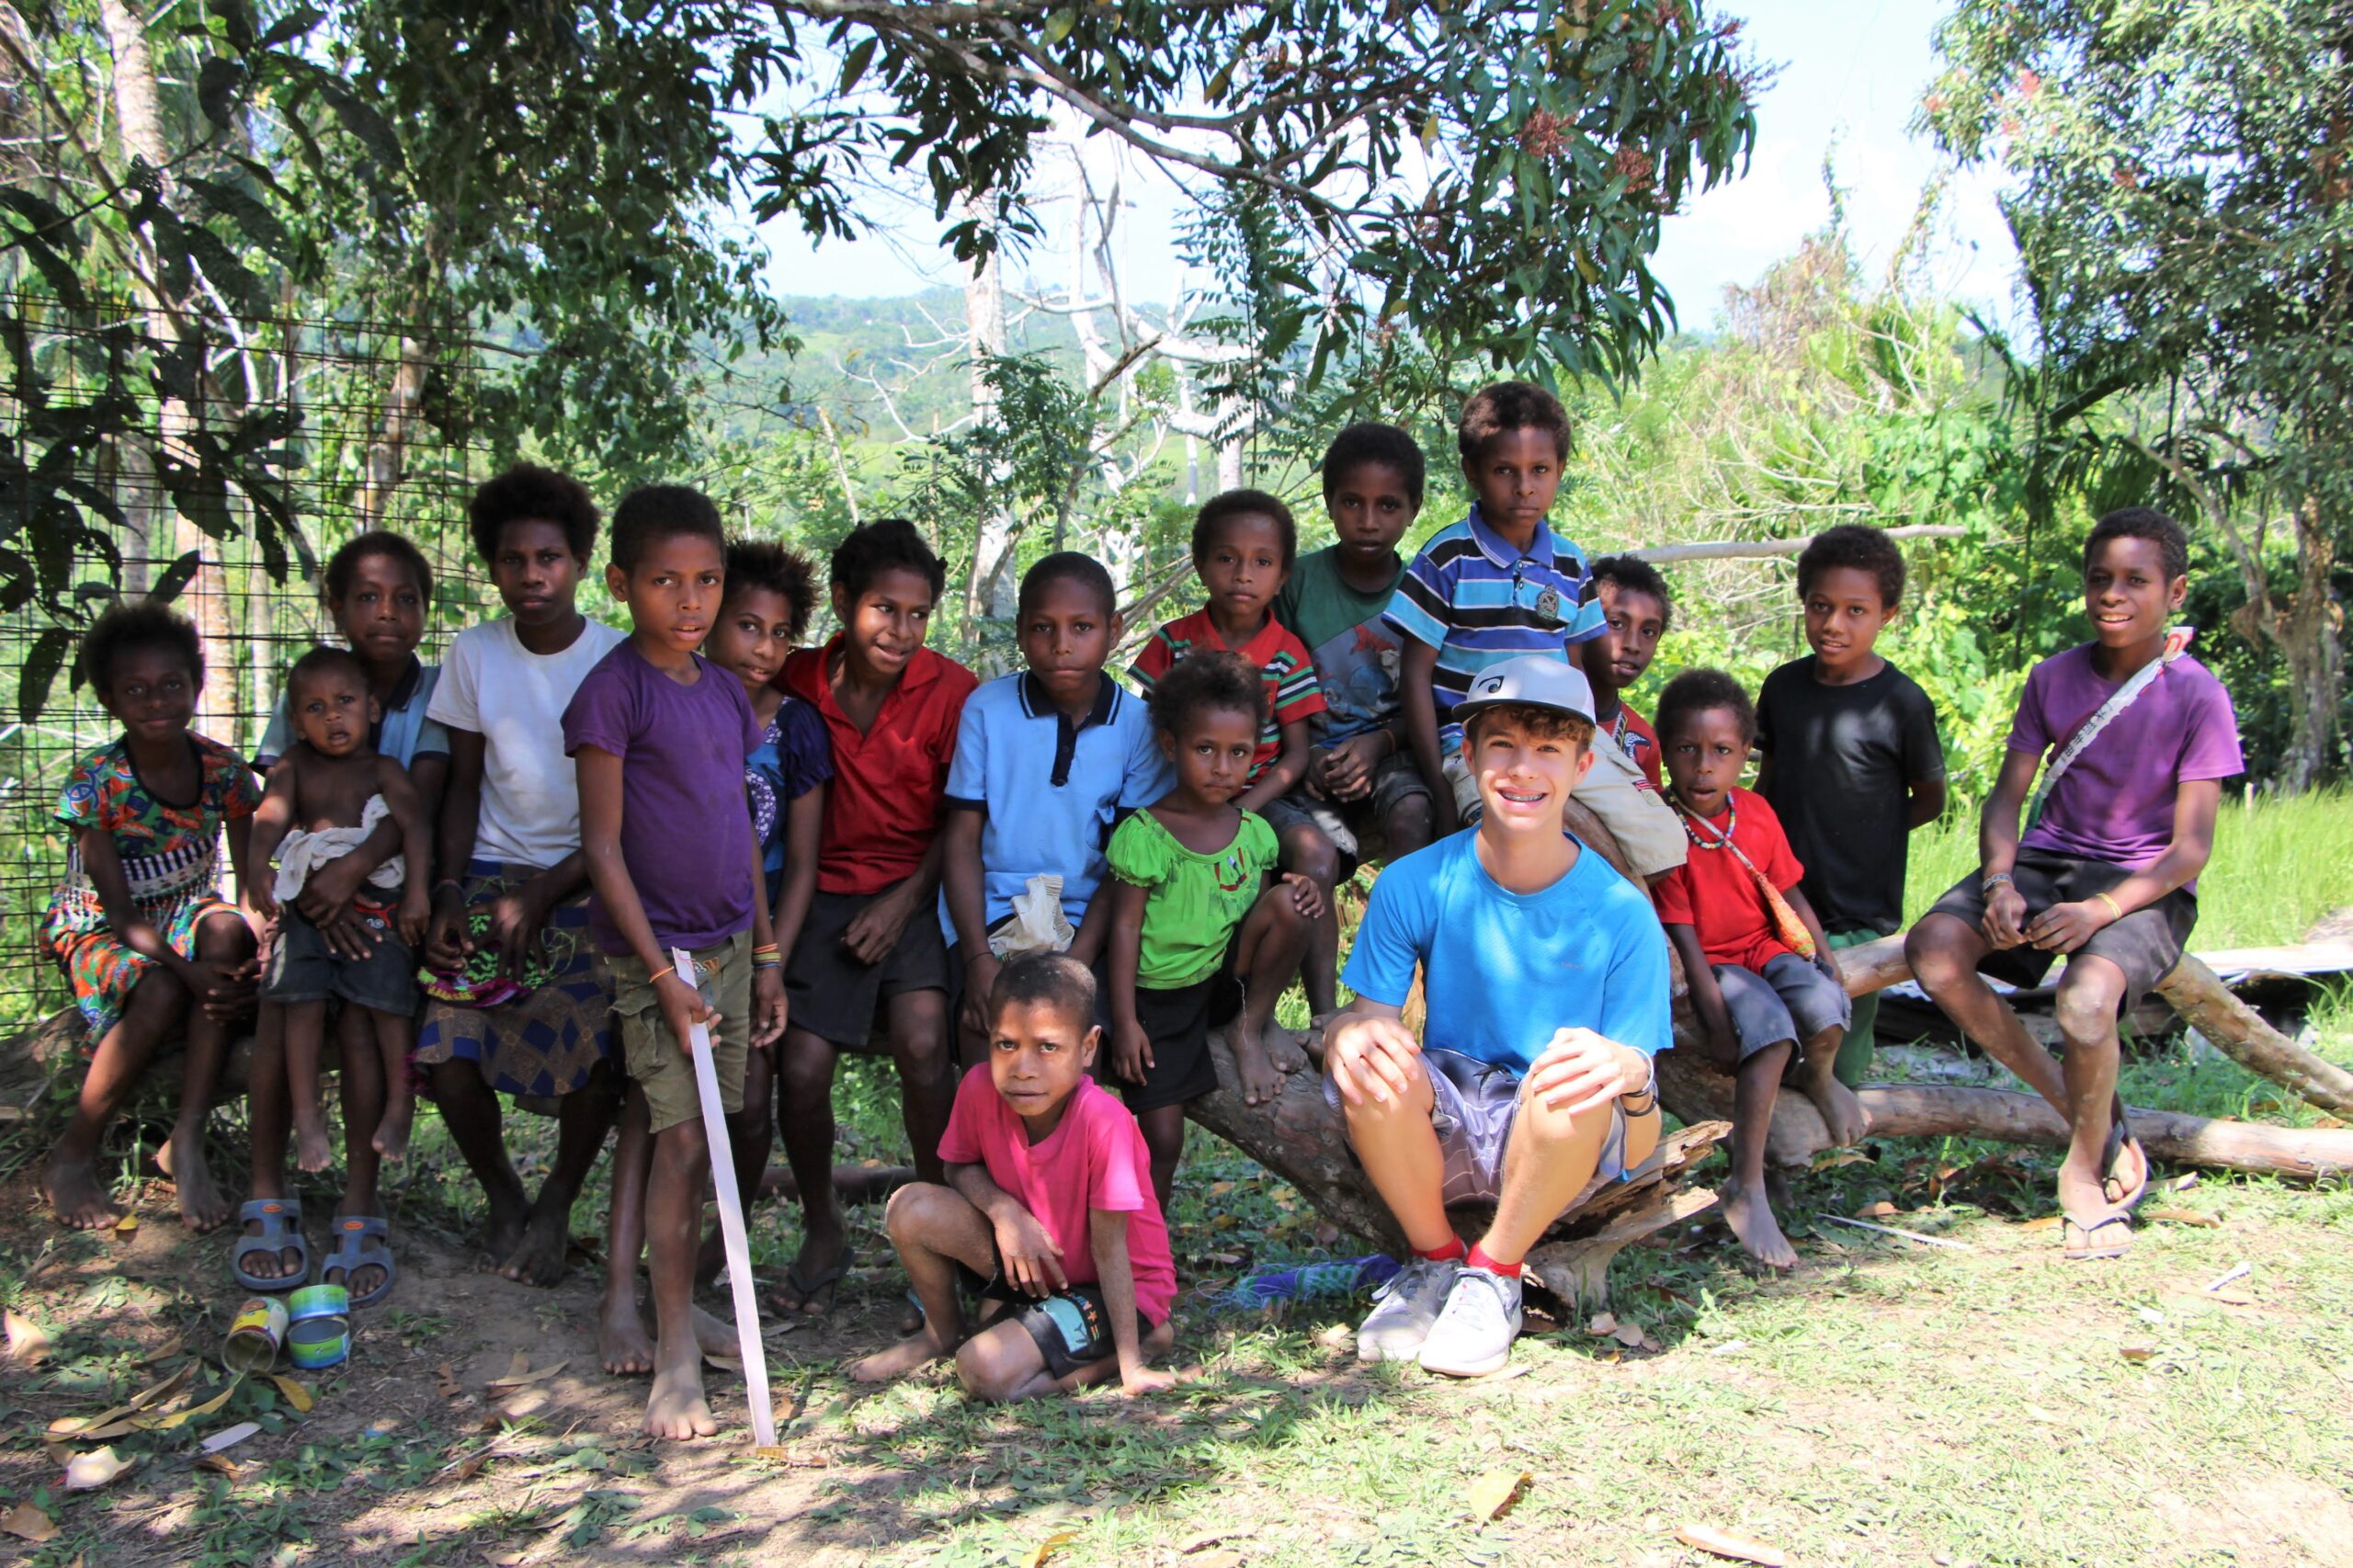 American teenage boy with group of local children in Papua New Guinea